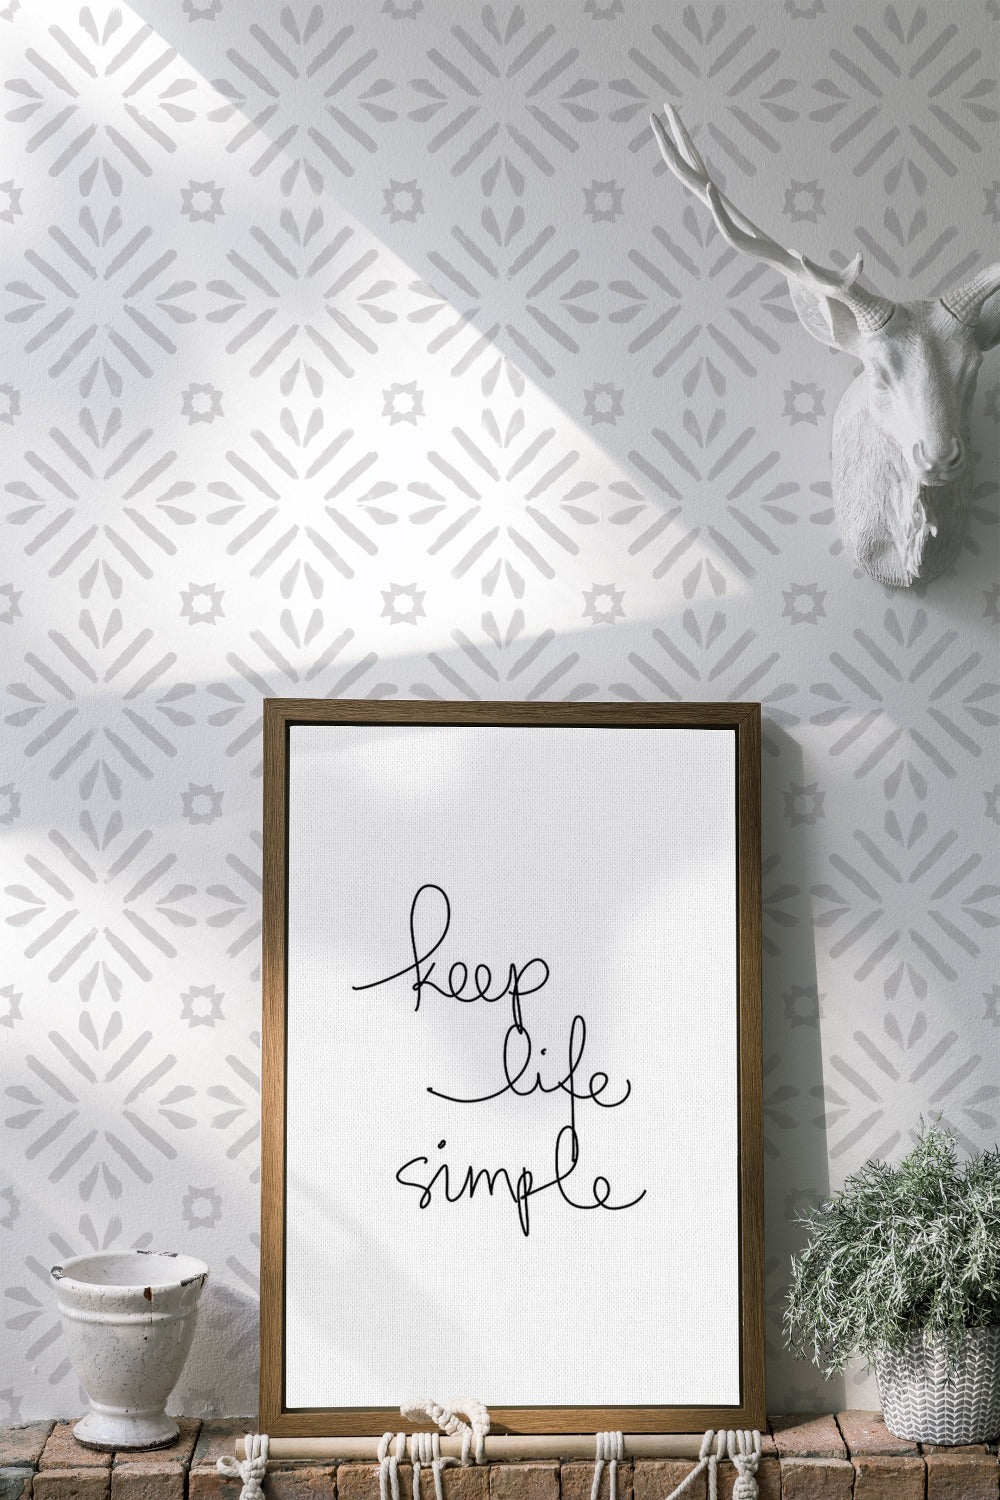 A rustic-chic interior with Geometric Wallpaper III featuring a repeating pattern of light gray stars on a white background, accented by a decorative faux deer head, a framed inspirational quote, and a woven plant holder for a blend of modern and natural elements.